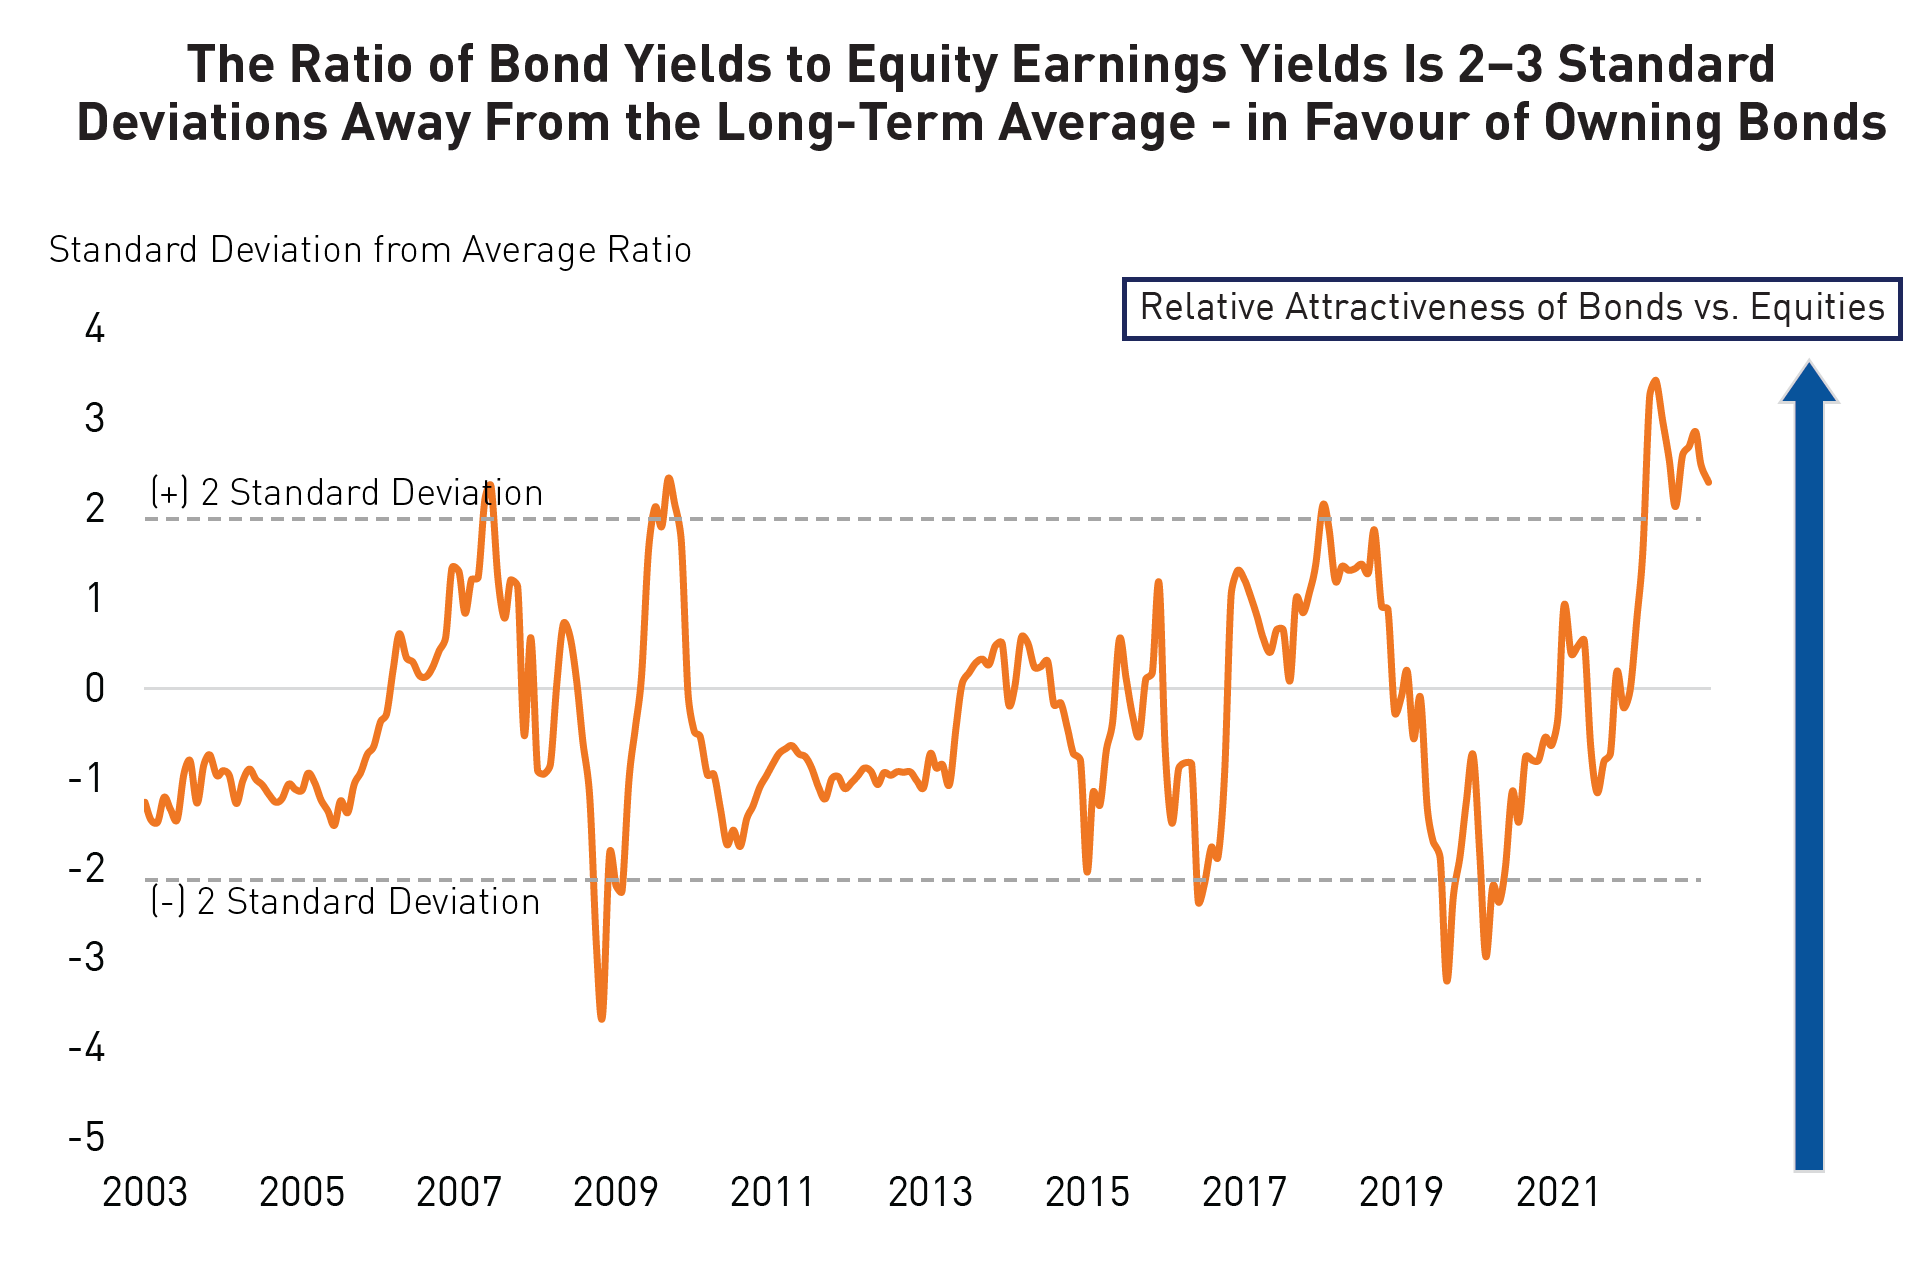 The Ratio of Bond Yields to Equity Earnings Yields Is 2-3 Standard Deviations Away From the Long-Term Average - in Favour of Owning Bonds